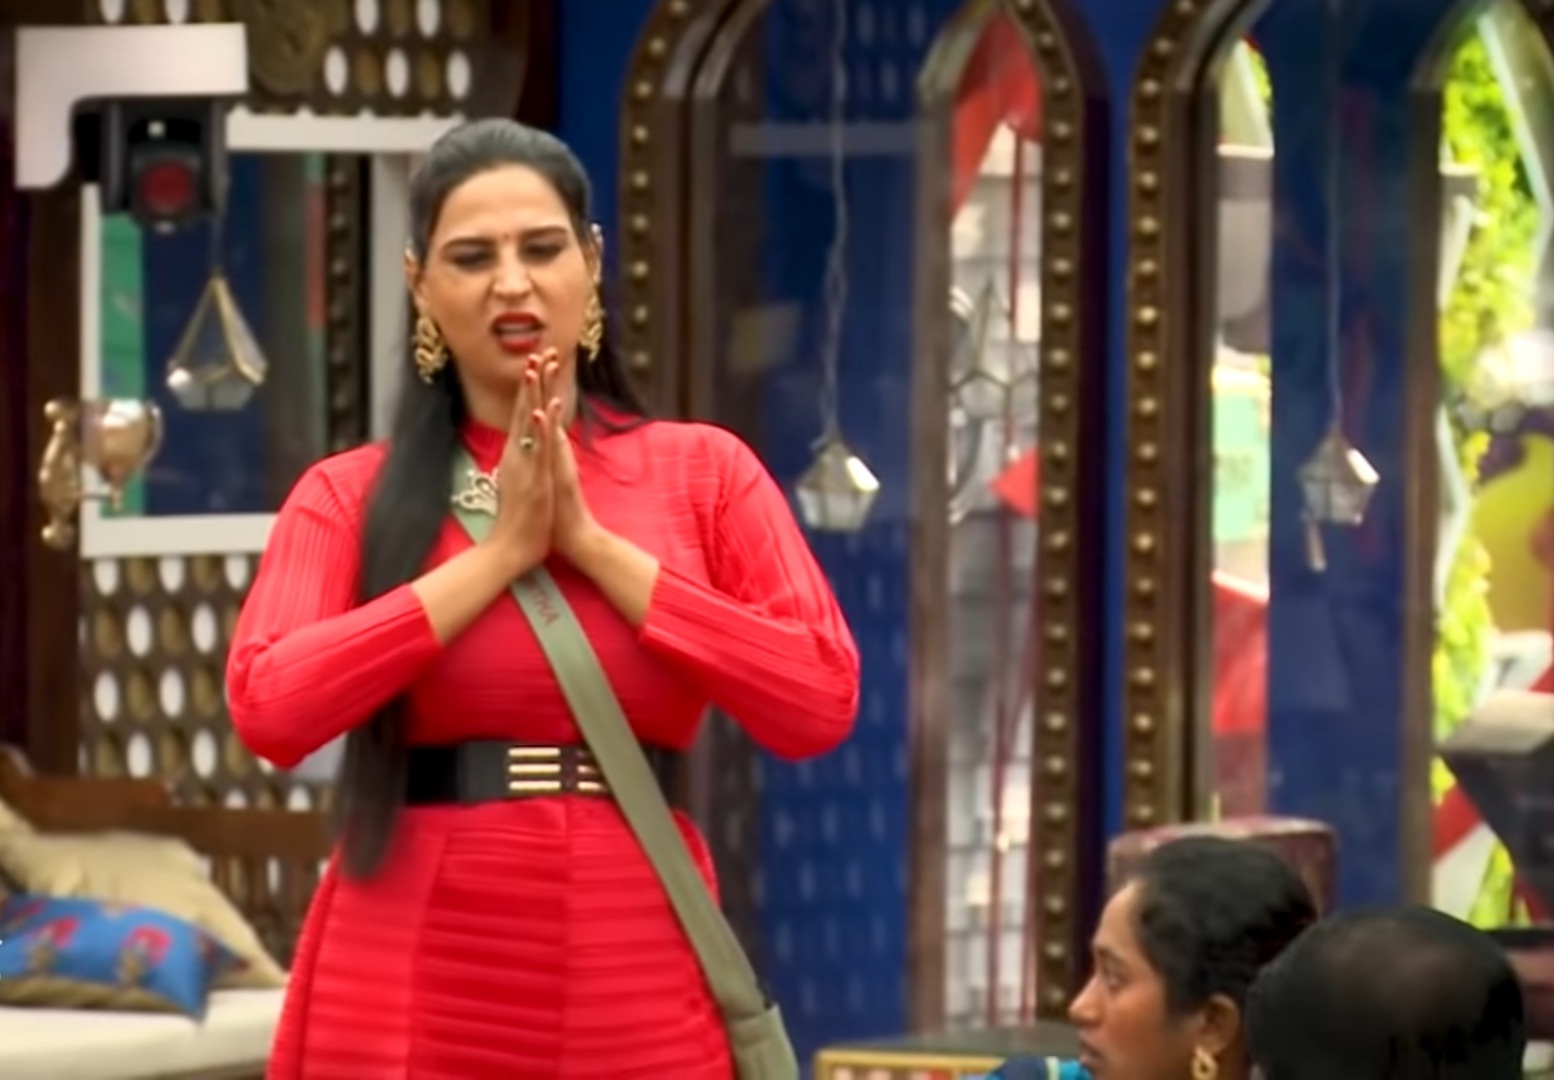 will Namitha Marimuthu reentry in biggboss house